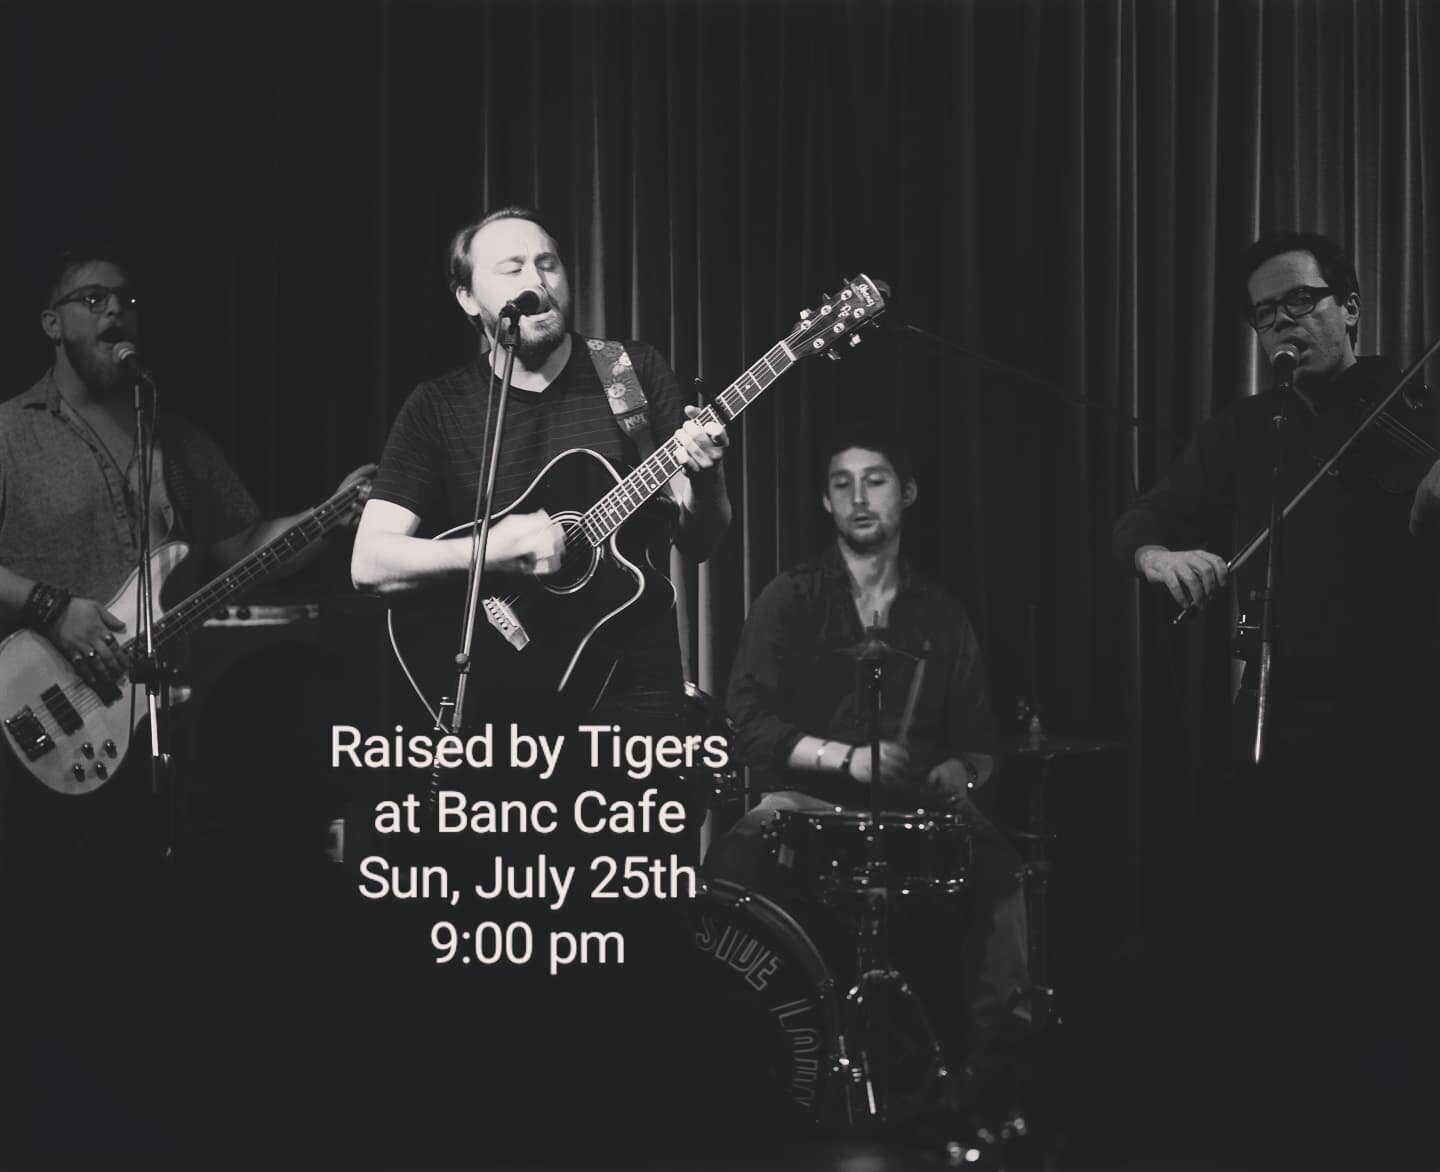 Next gig confirmed! We'll be back at @bancnyc nine days from now. July 25th, 9pm. Mark your calendars and tell your friends! It's time to boogie!

#raisedbytigers #banccafe #livemusic #nycmusic #gig #bargig